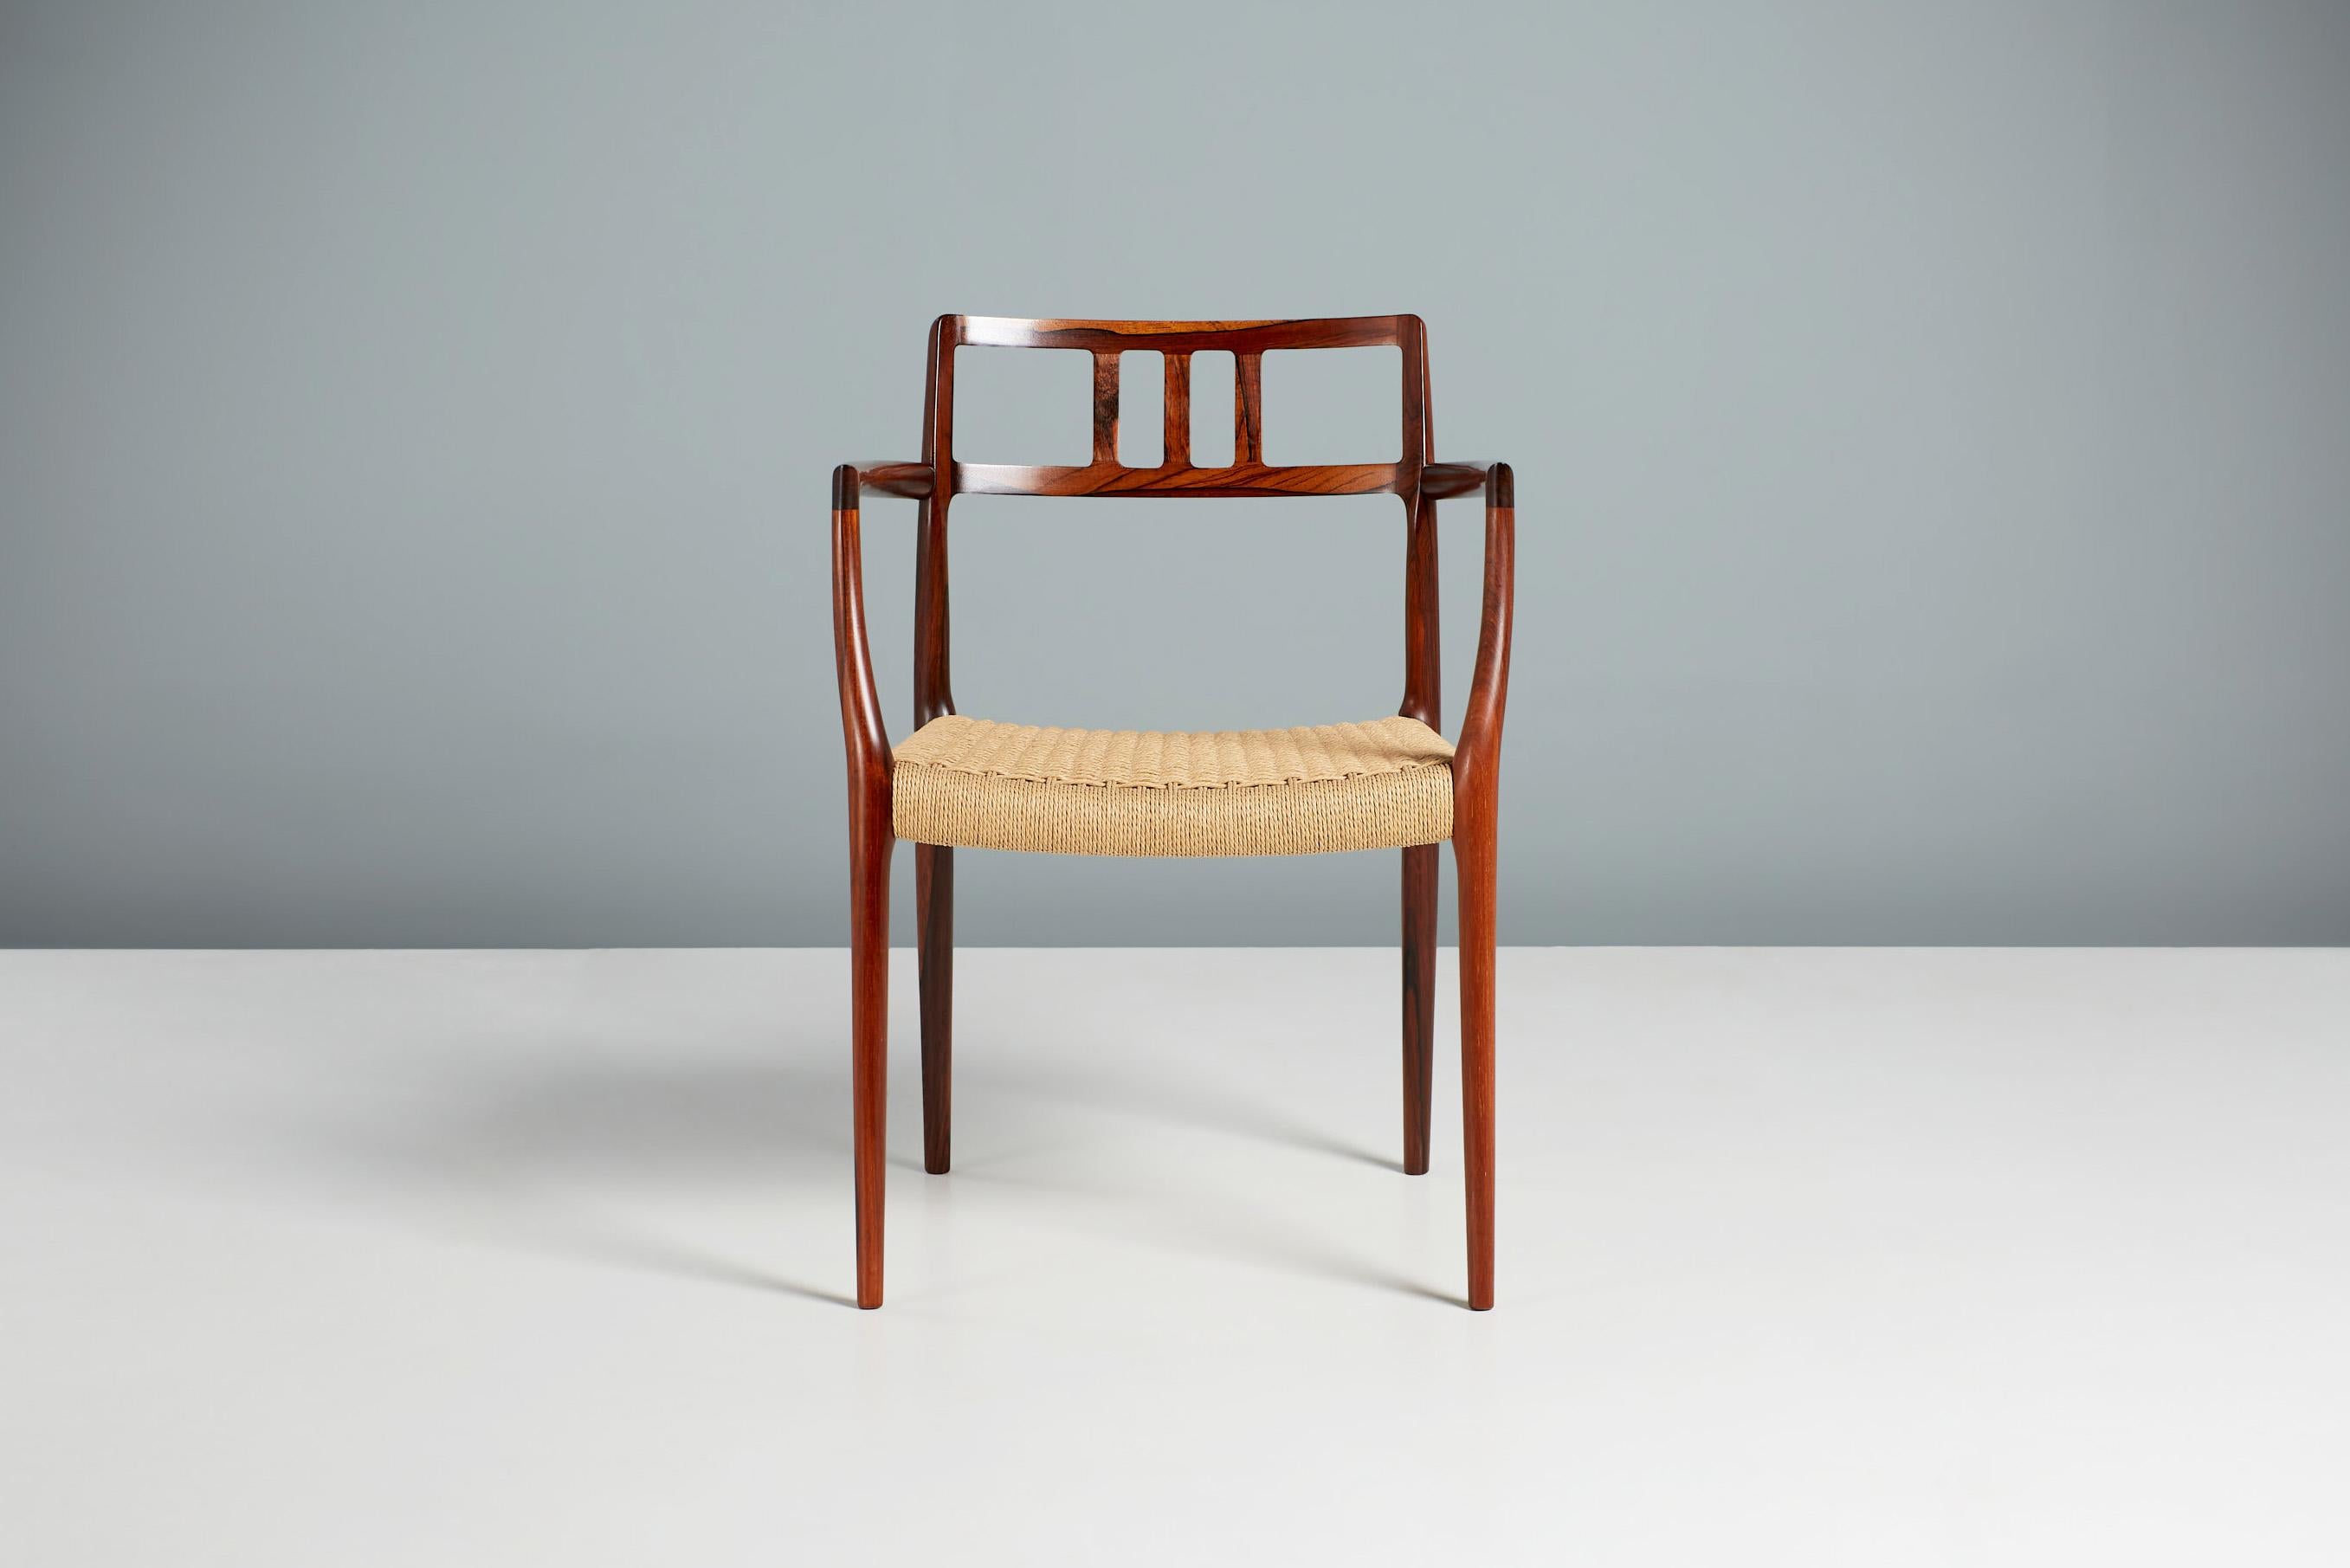 Niels Møller Model 64 armchair

A rarely seen rosewood example of Niels Moller's classic Model 64 armchair, designed in 1966 by Møller for his own company J.L. Møller Møbelfabrik in Denmark. The frame is made from highly-figured, solid rosewood